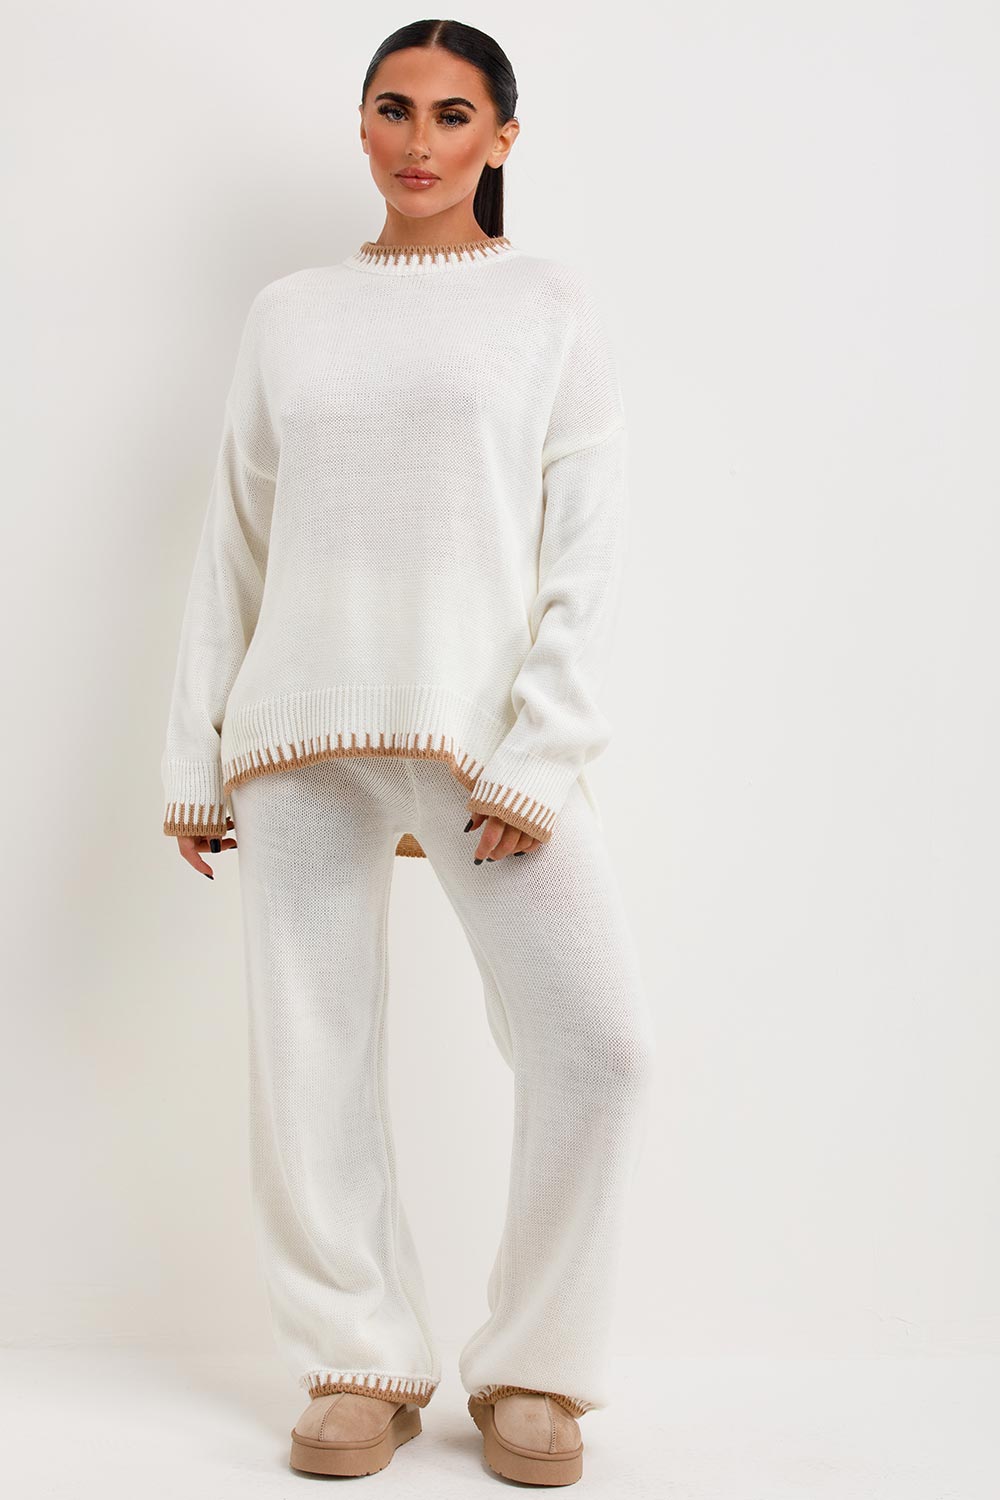 womens knitted loungewear set with knitted detail